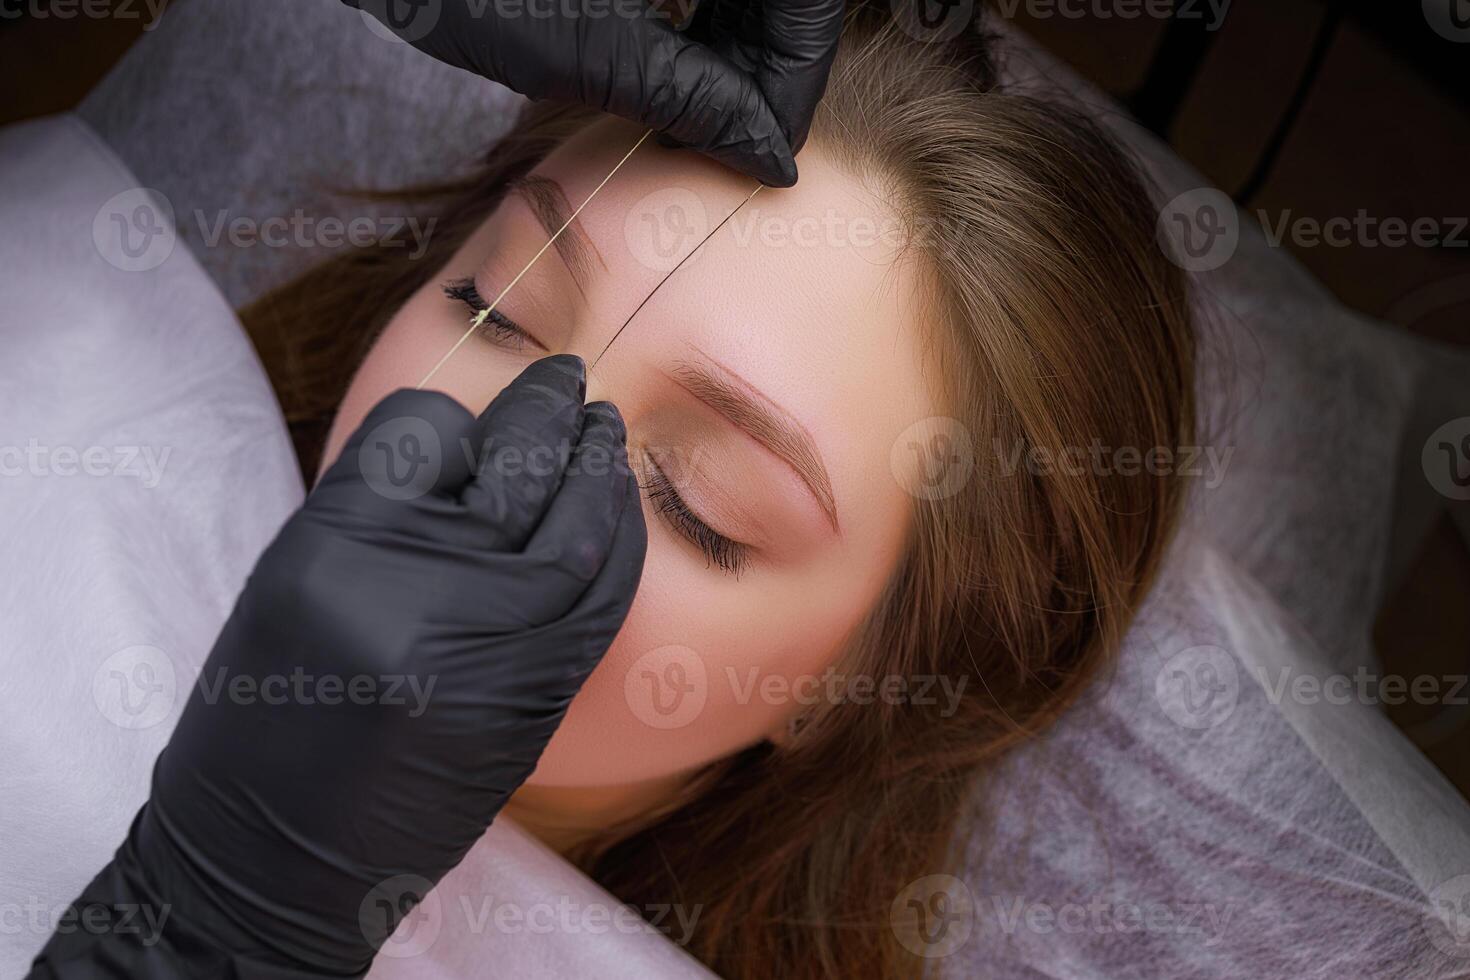 Before the permanent makeup procedure, the master makes a marking with a thread on the model's eyebrows. PMU Procedure, Permanent Eyebrow Makeup. photo